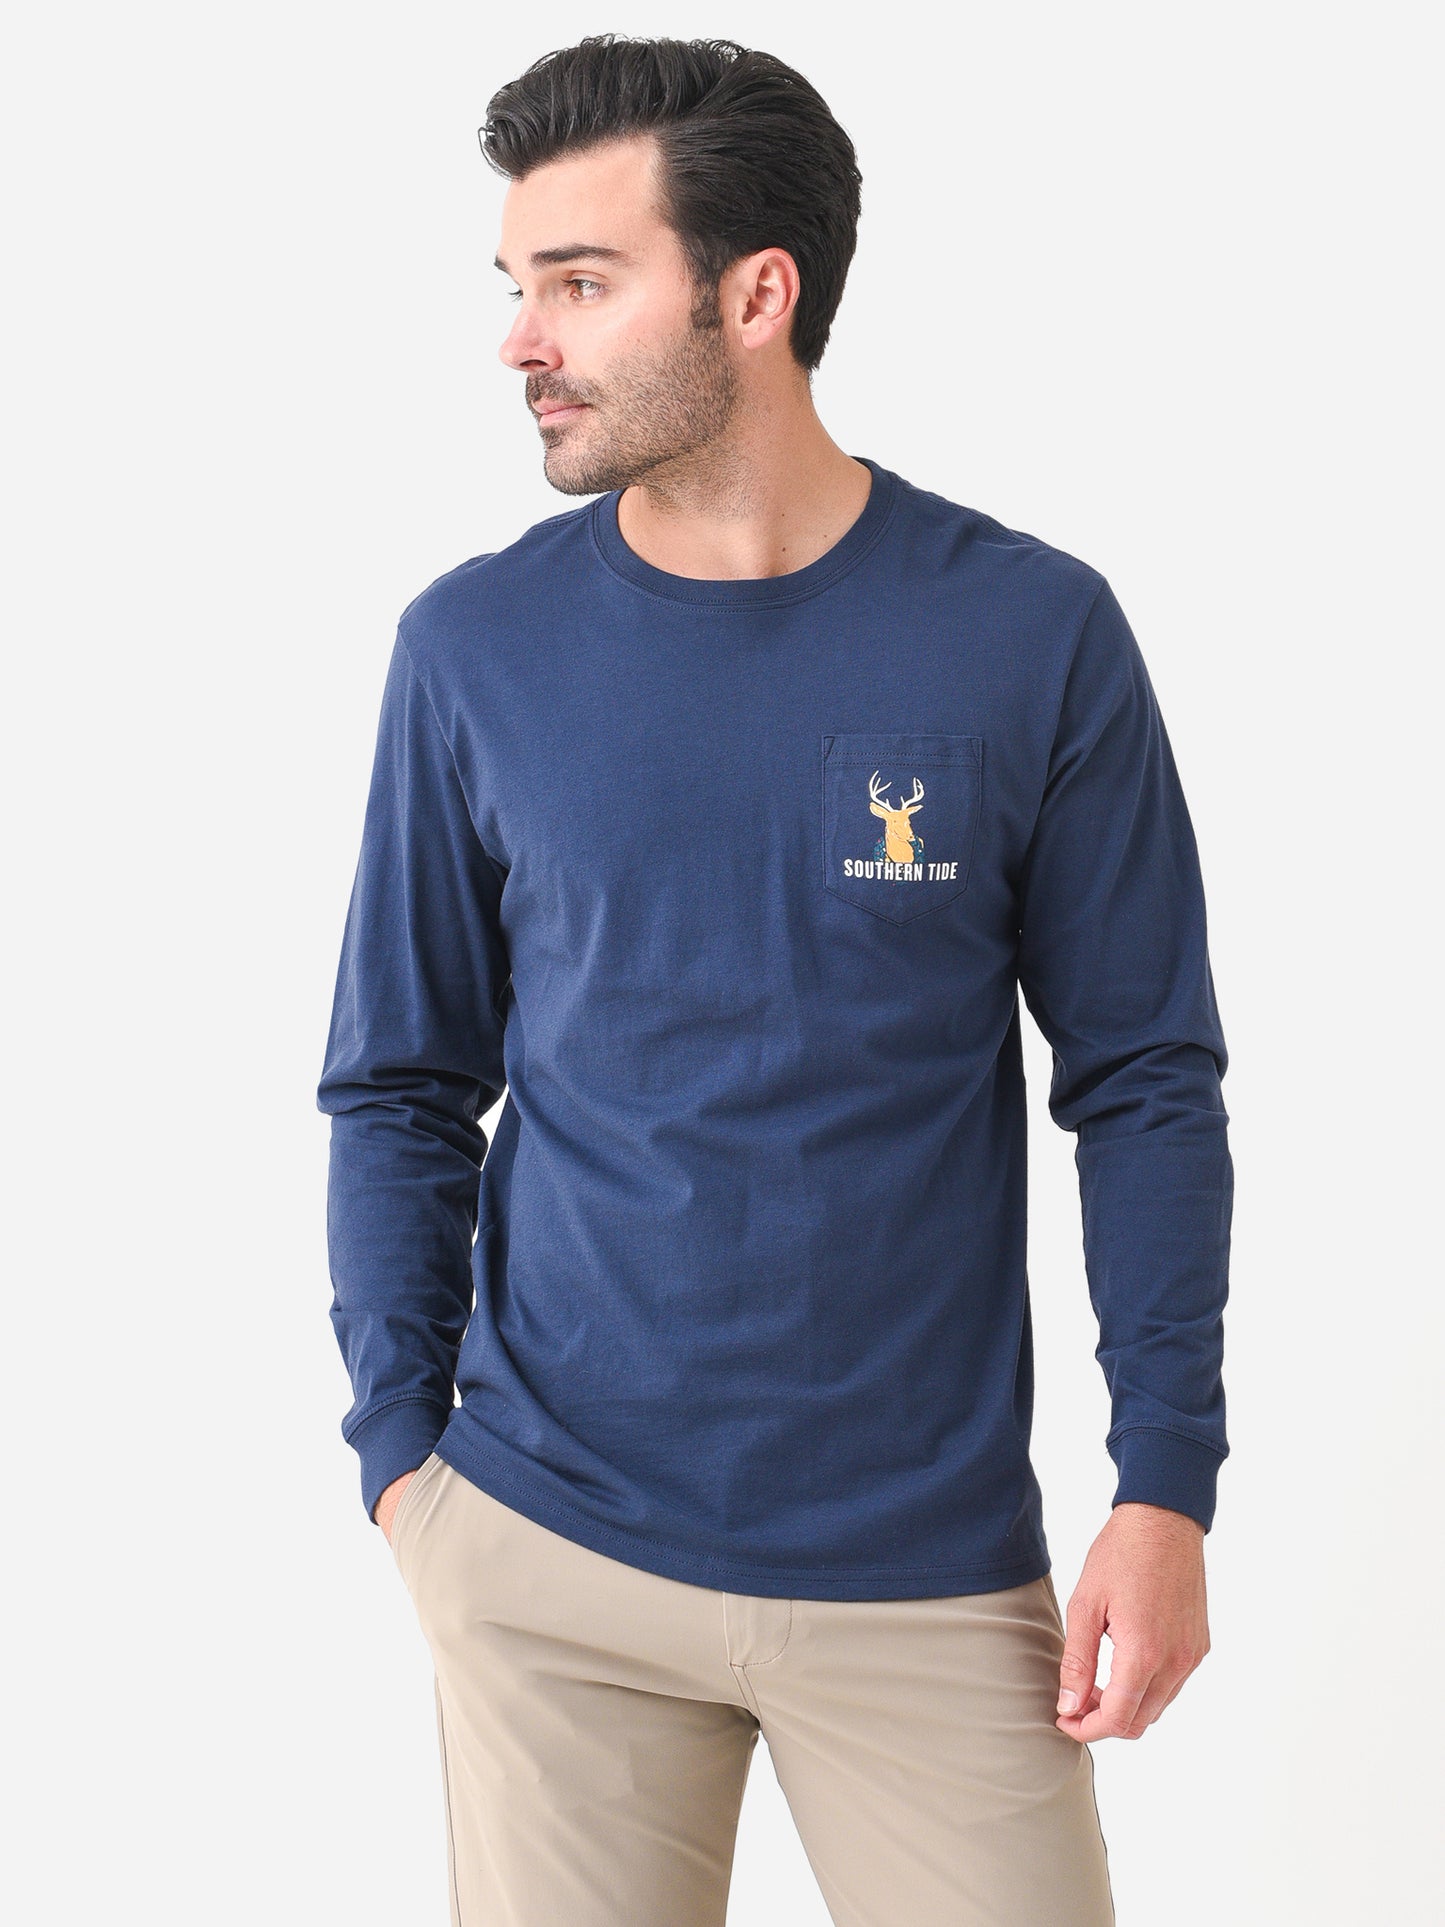 Southern Tide Men's Merry Mantle Long Sleeve T-Shirt